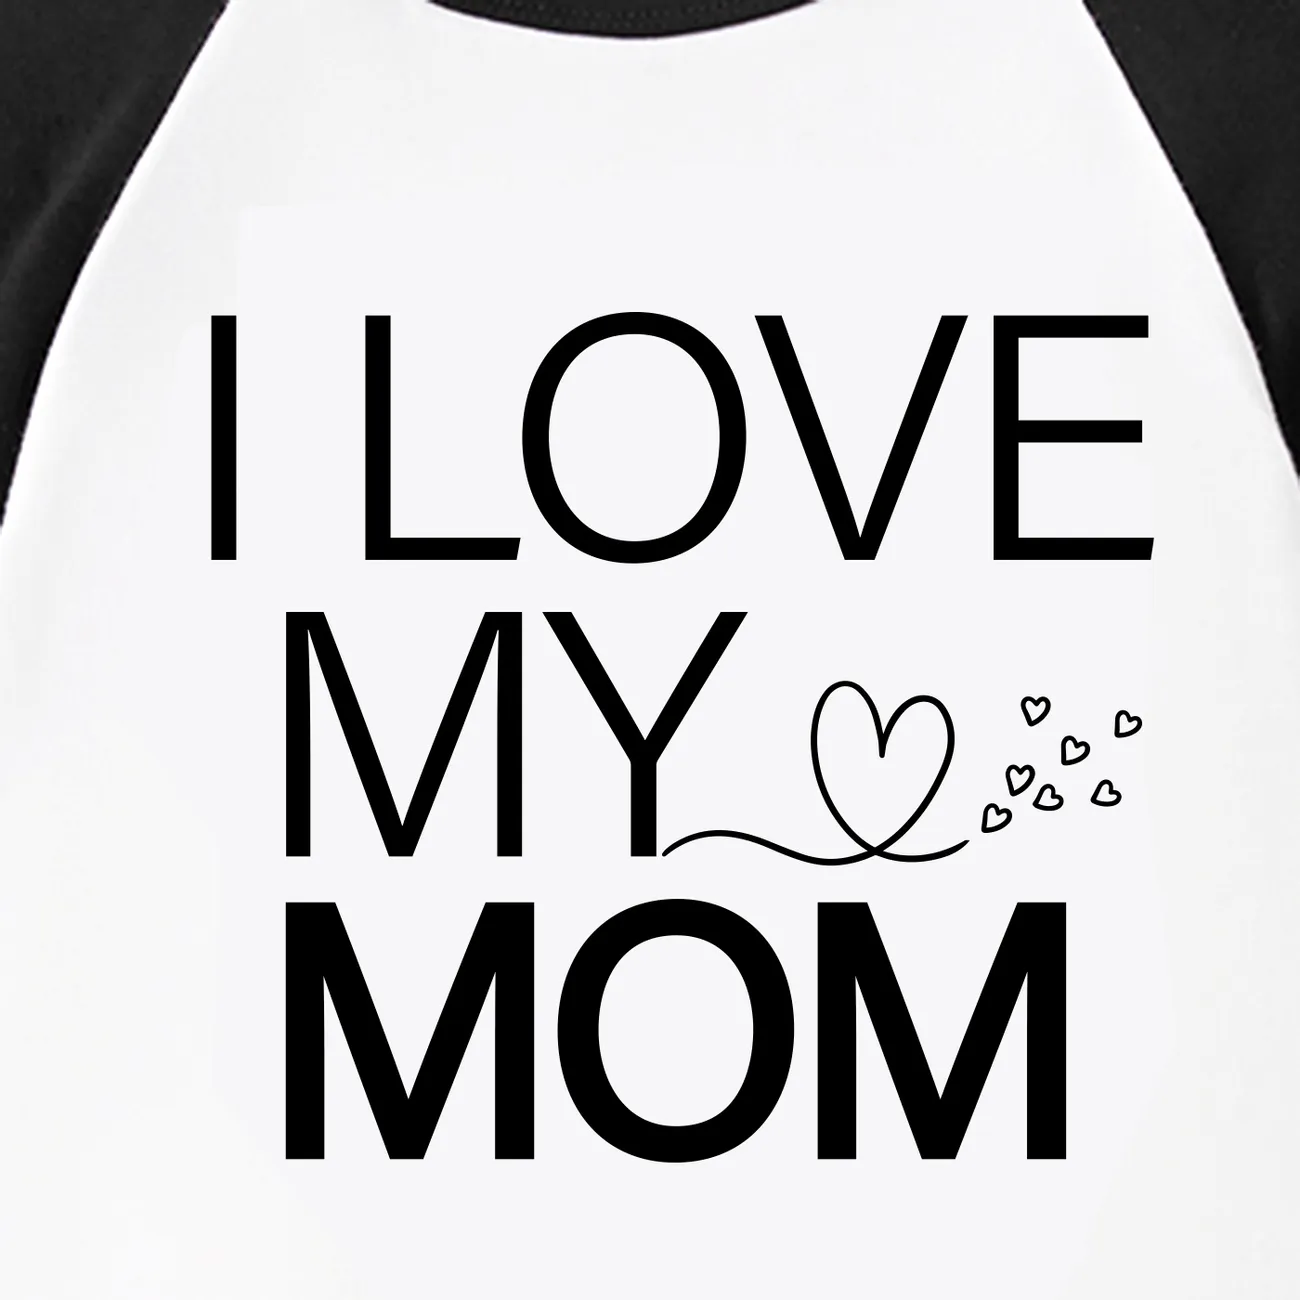 Mother's Day Mommy and Me Short Sleeves Slogan Print Whit Tops White big image 1